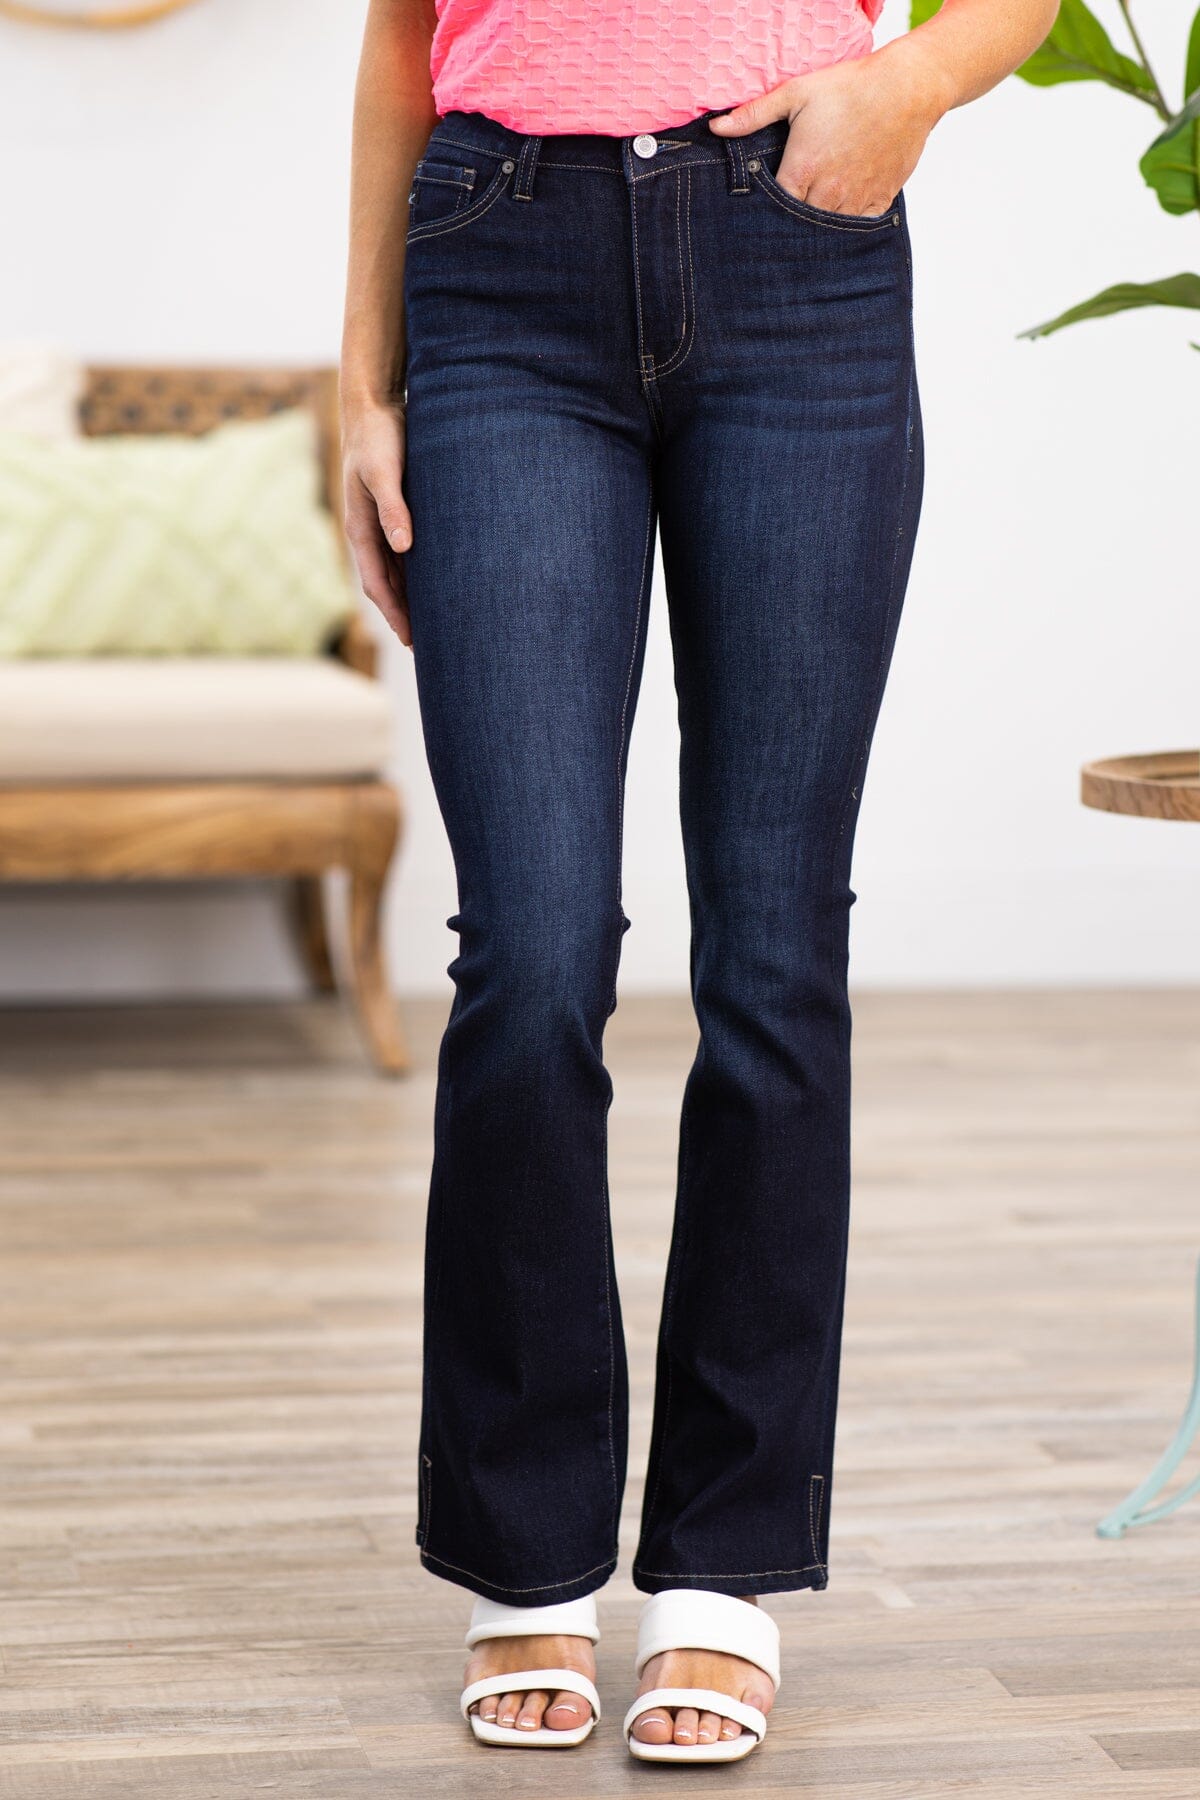 KanCan Dark Wash Side Bootcut Jeans - Filly Flair